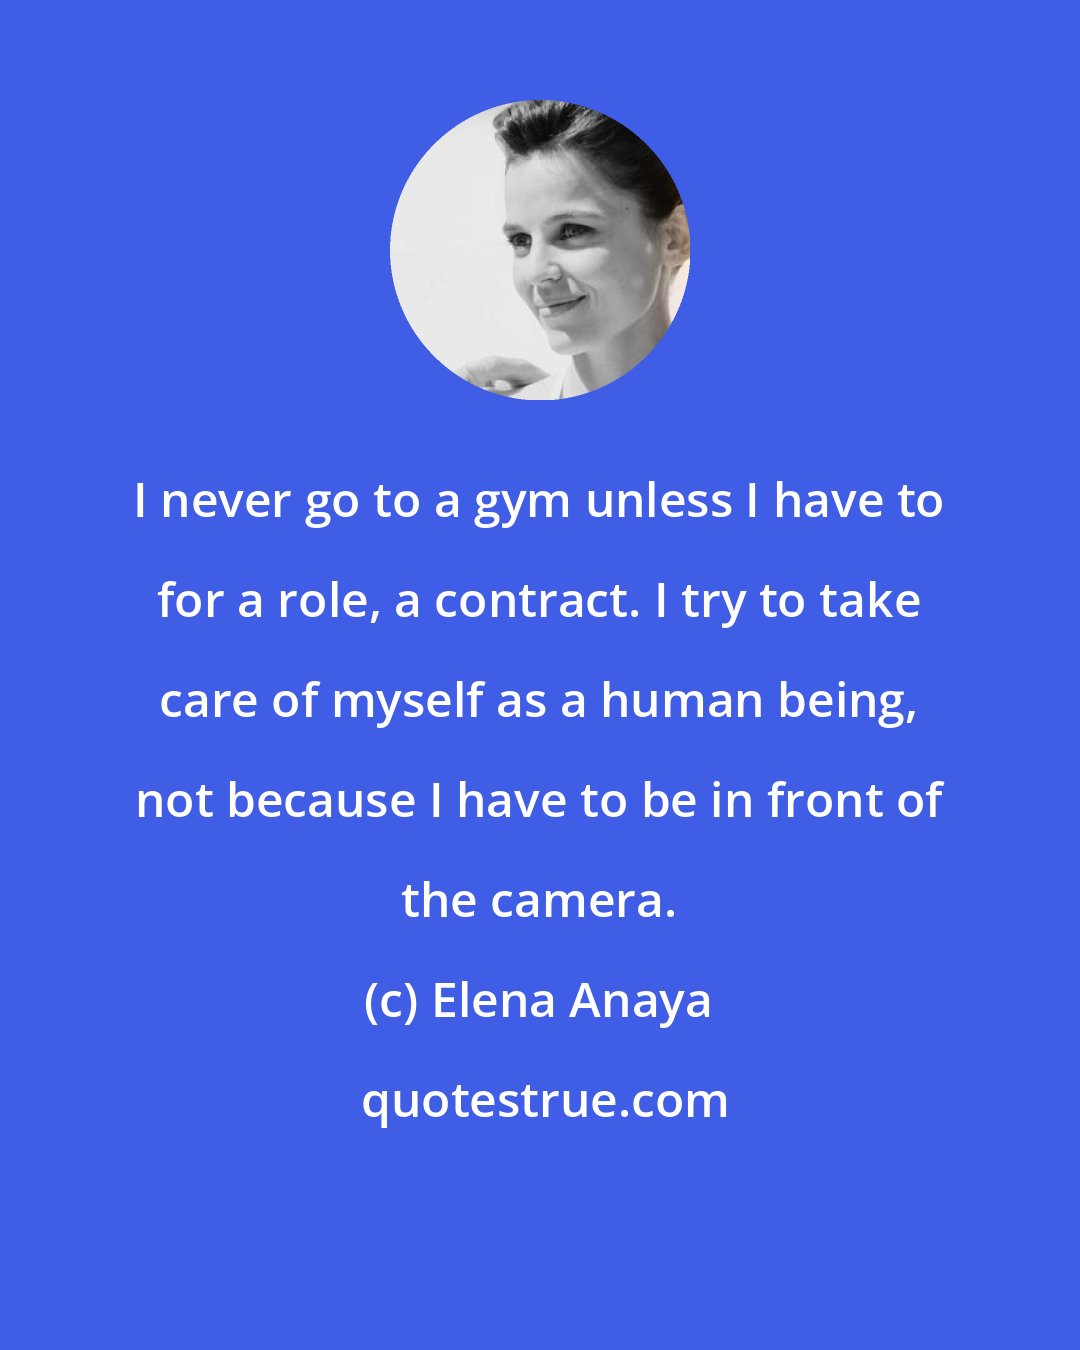 Elena Anaya: I never go to a gym unless I have to for a role, a contract. I try to take care of myself as a human being, not because I have to be in front of the camera.